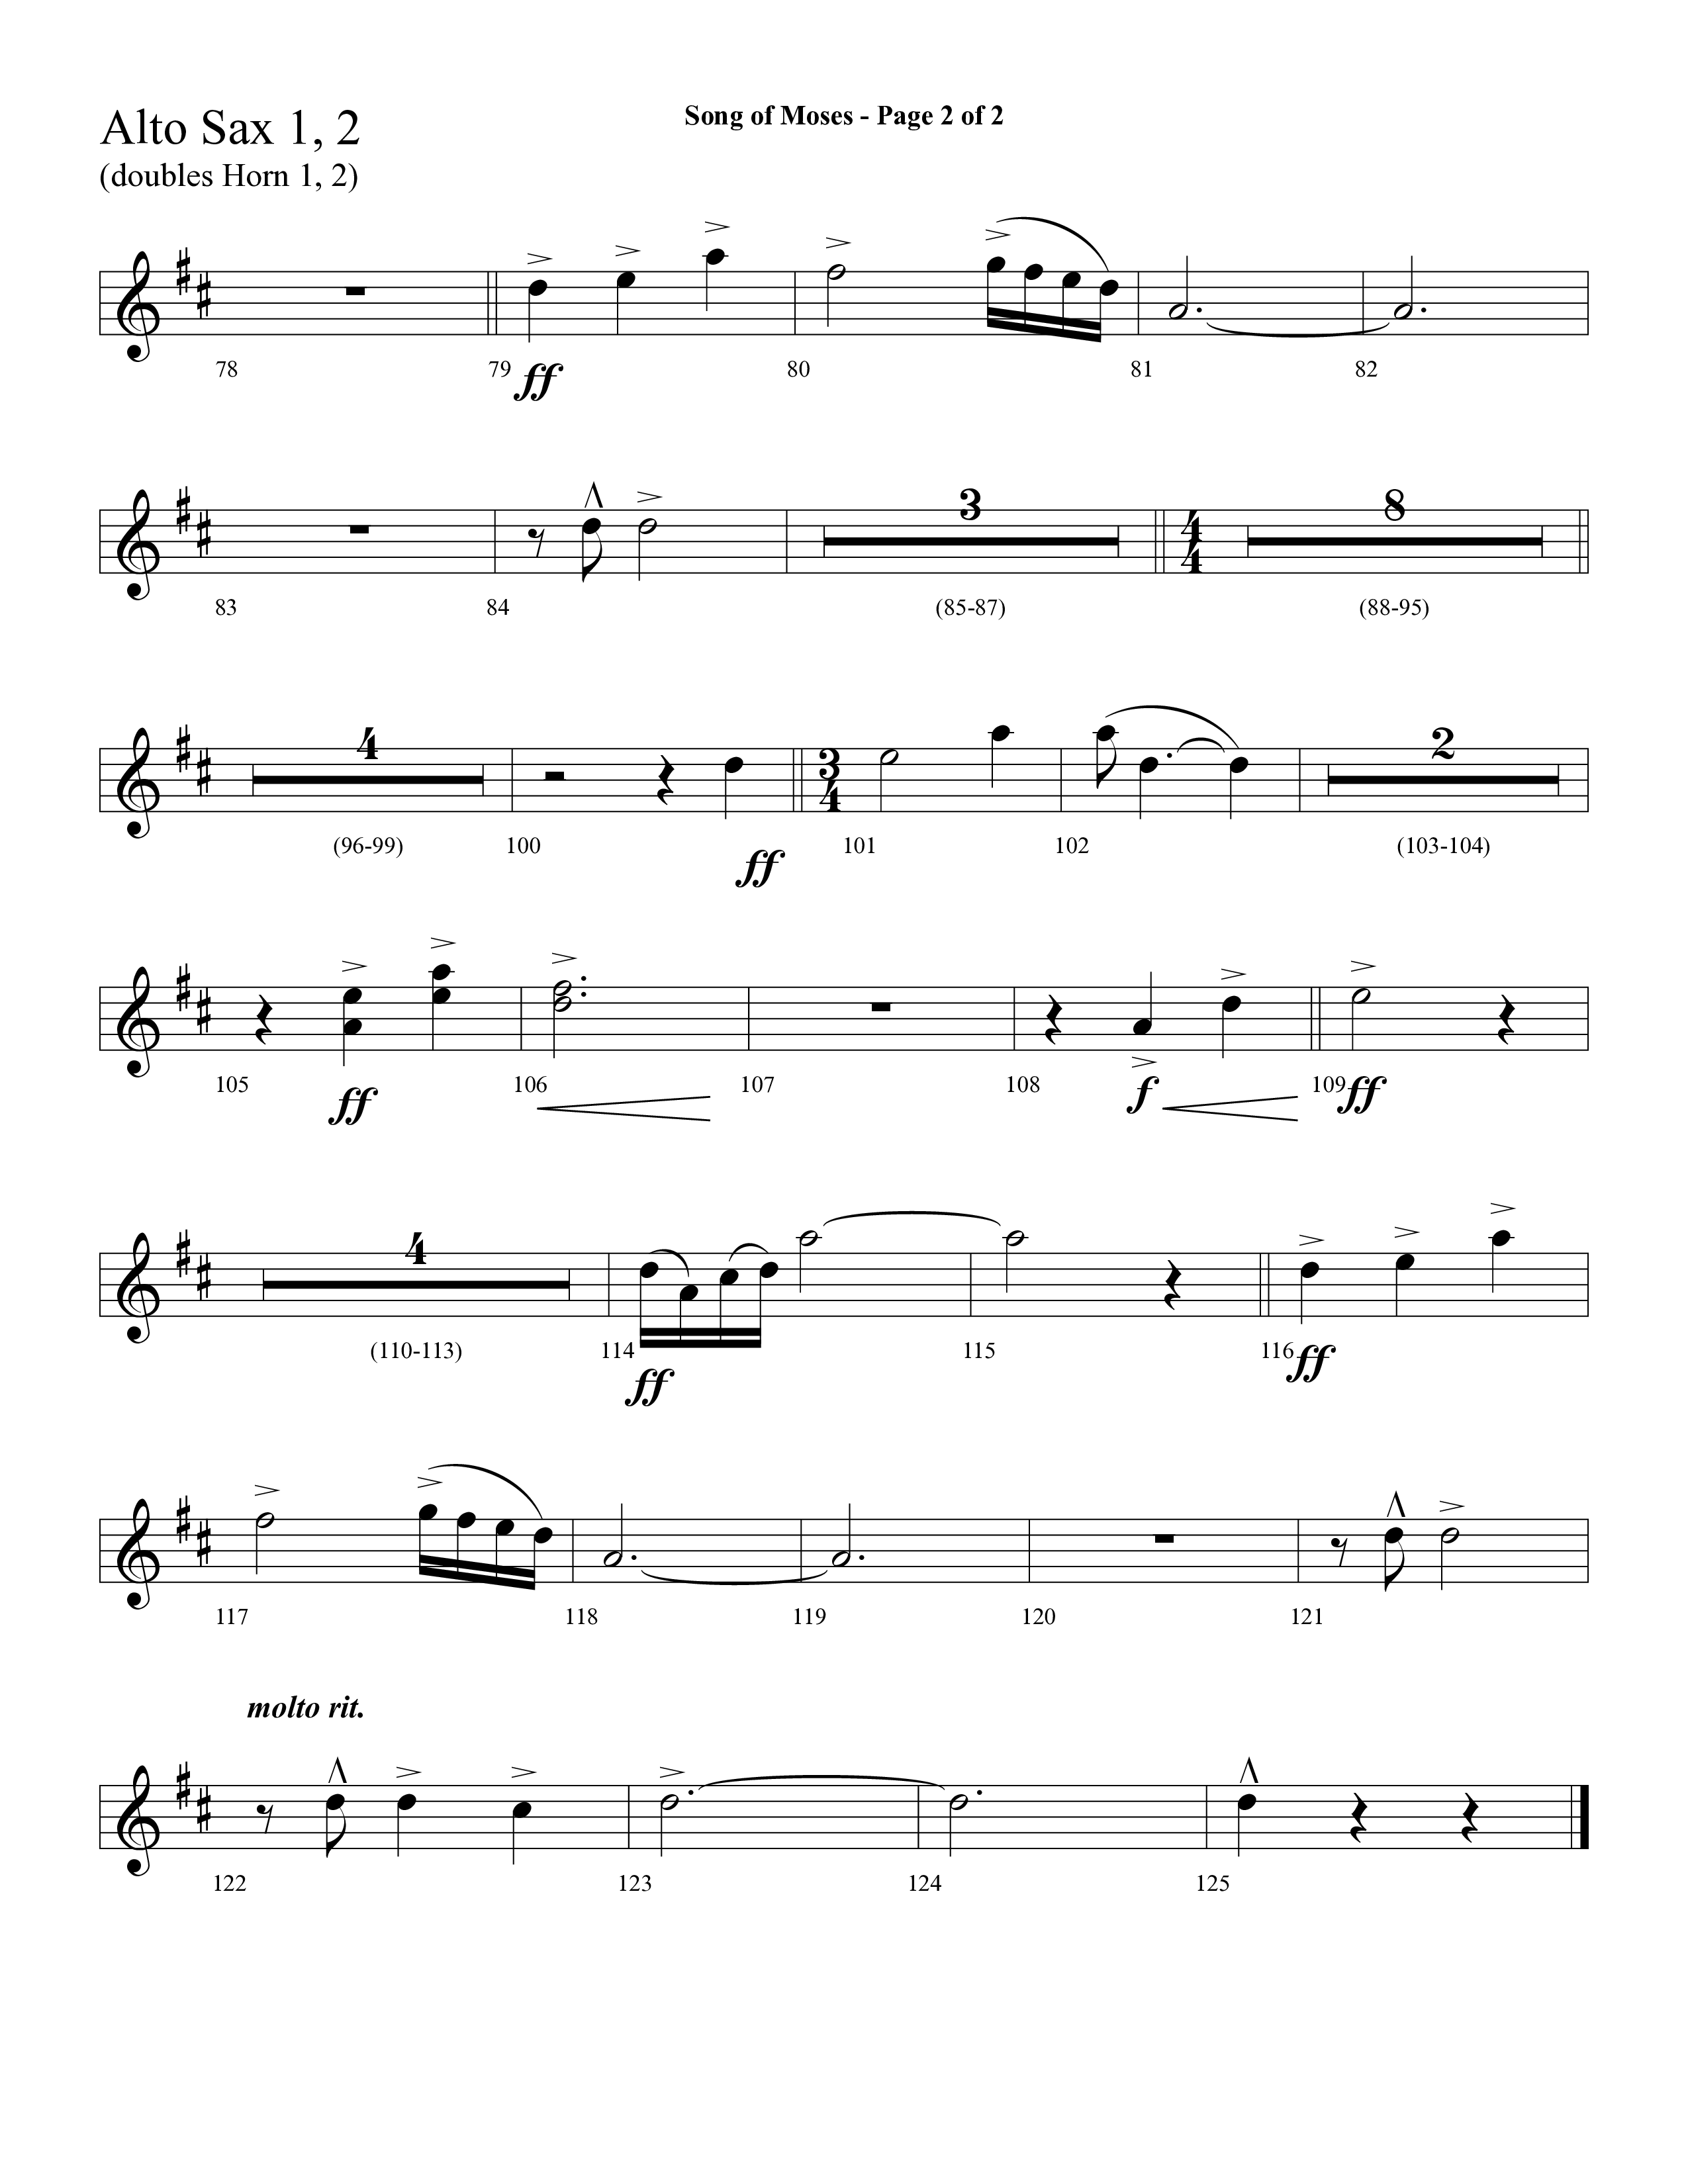 Song Of Moses (Choral Anthem SATB) Alto Sax 1/2 (Lifeway Choral / Arr. Cliff Duren)